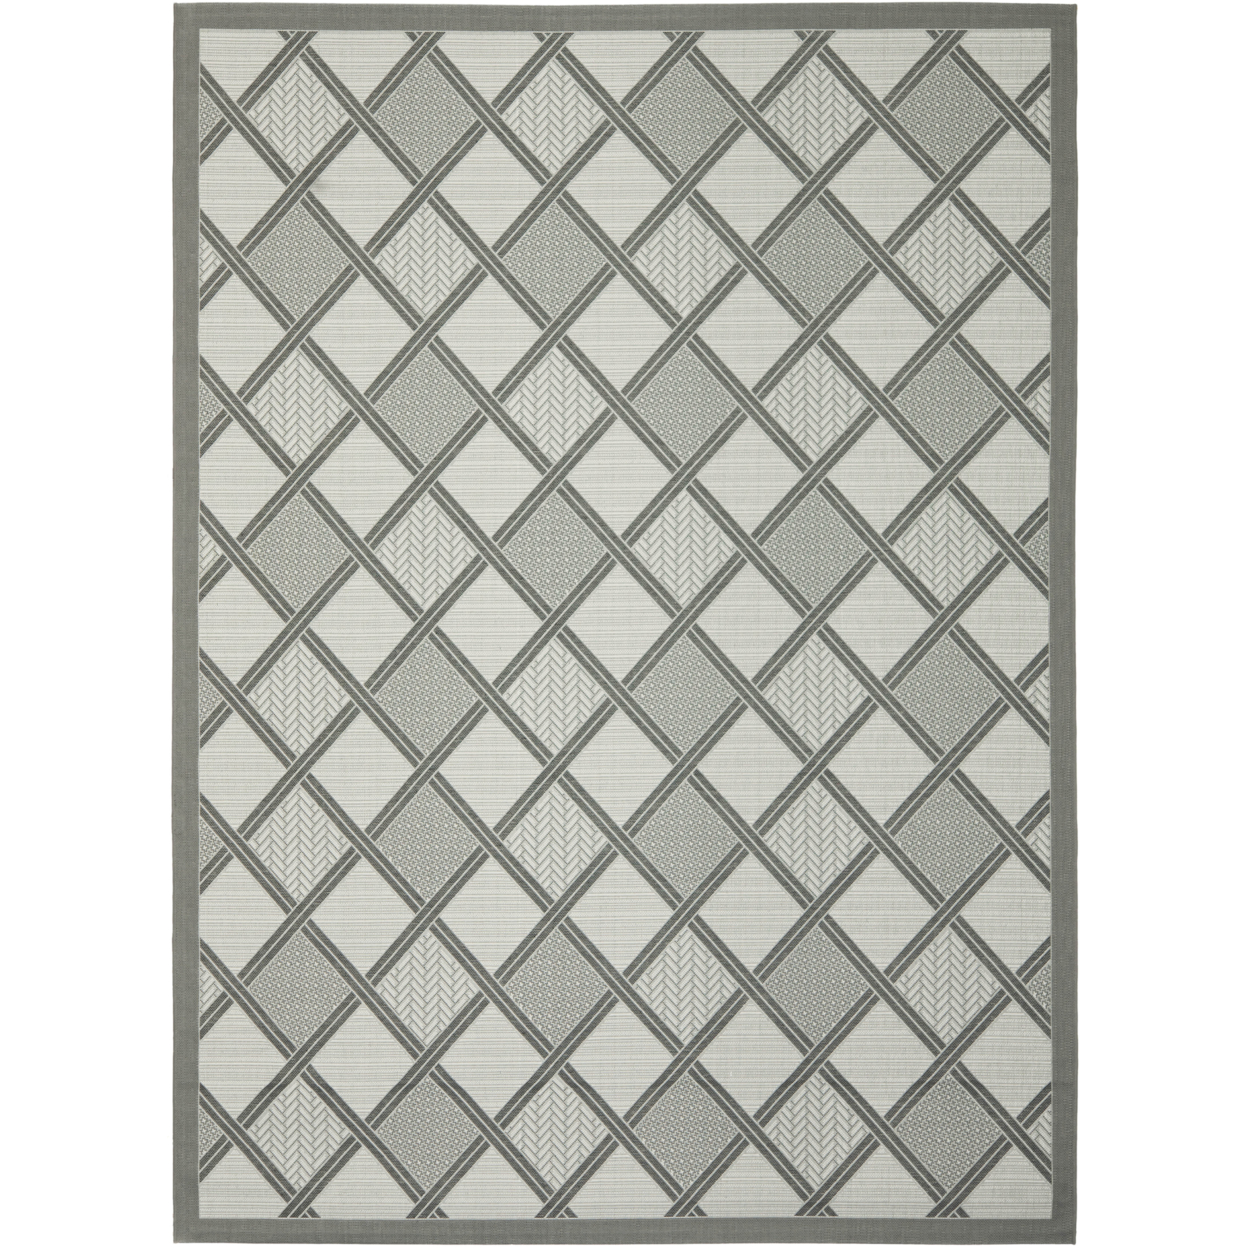 SAFAVIEH Outdoor CY7570-78A5 Courtyard Anthracite / Lt Grey Rug - 4' X 5' 7